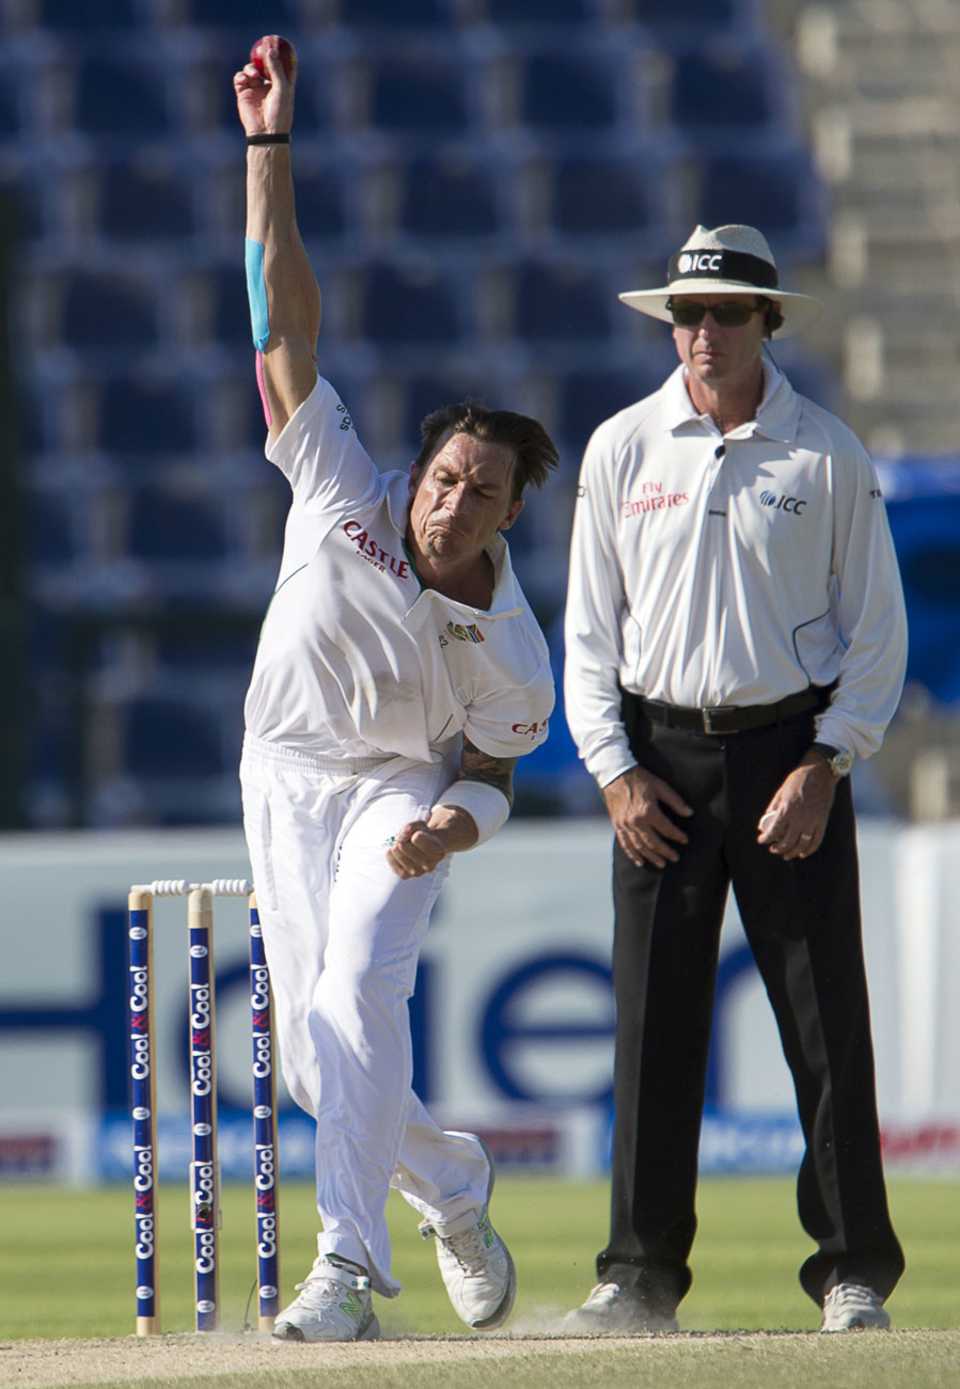 Dale Steyn picked up a wicket in his second over